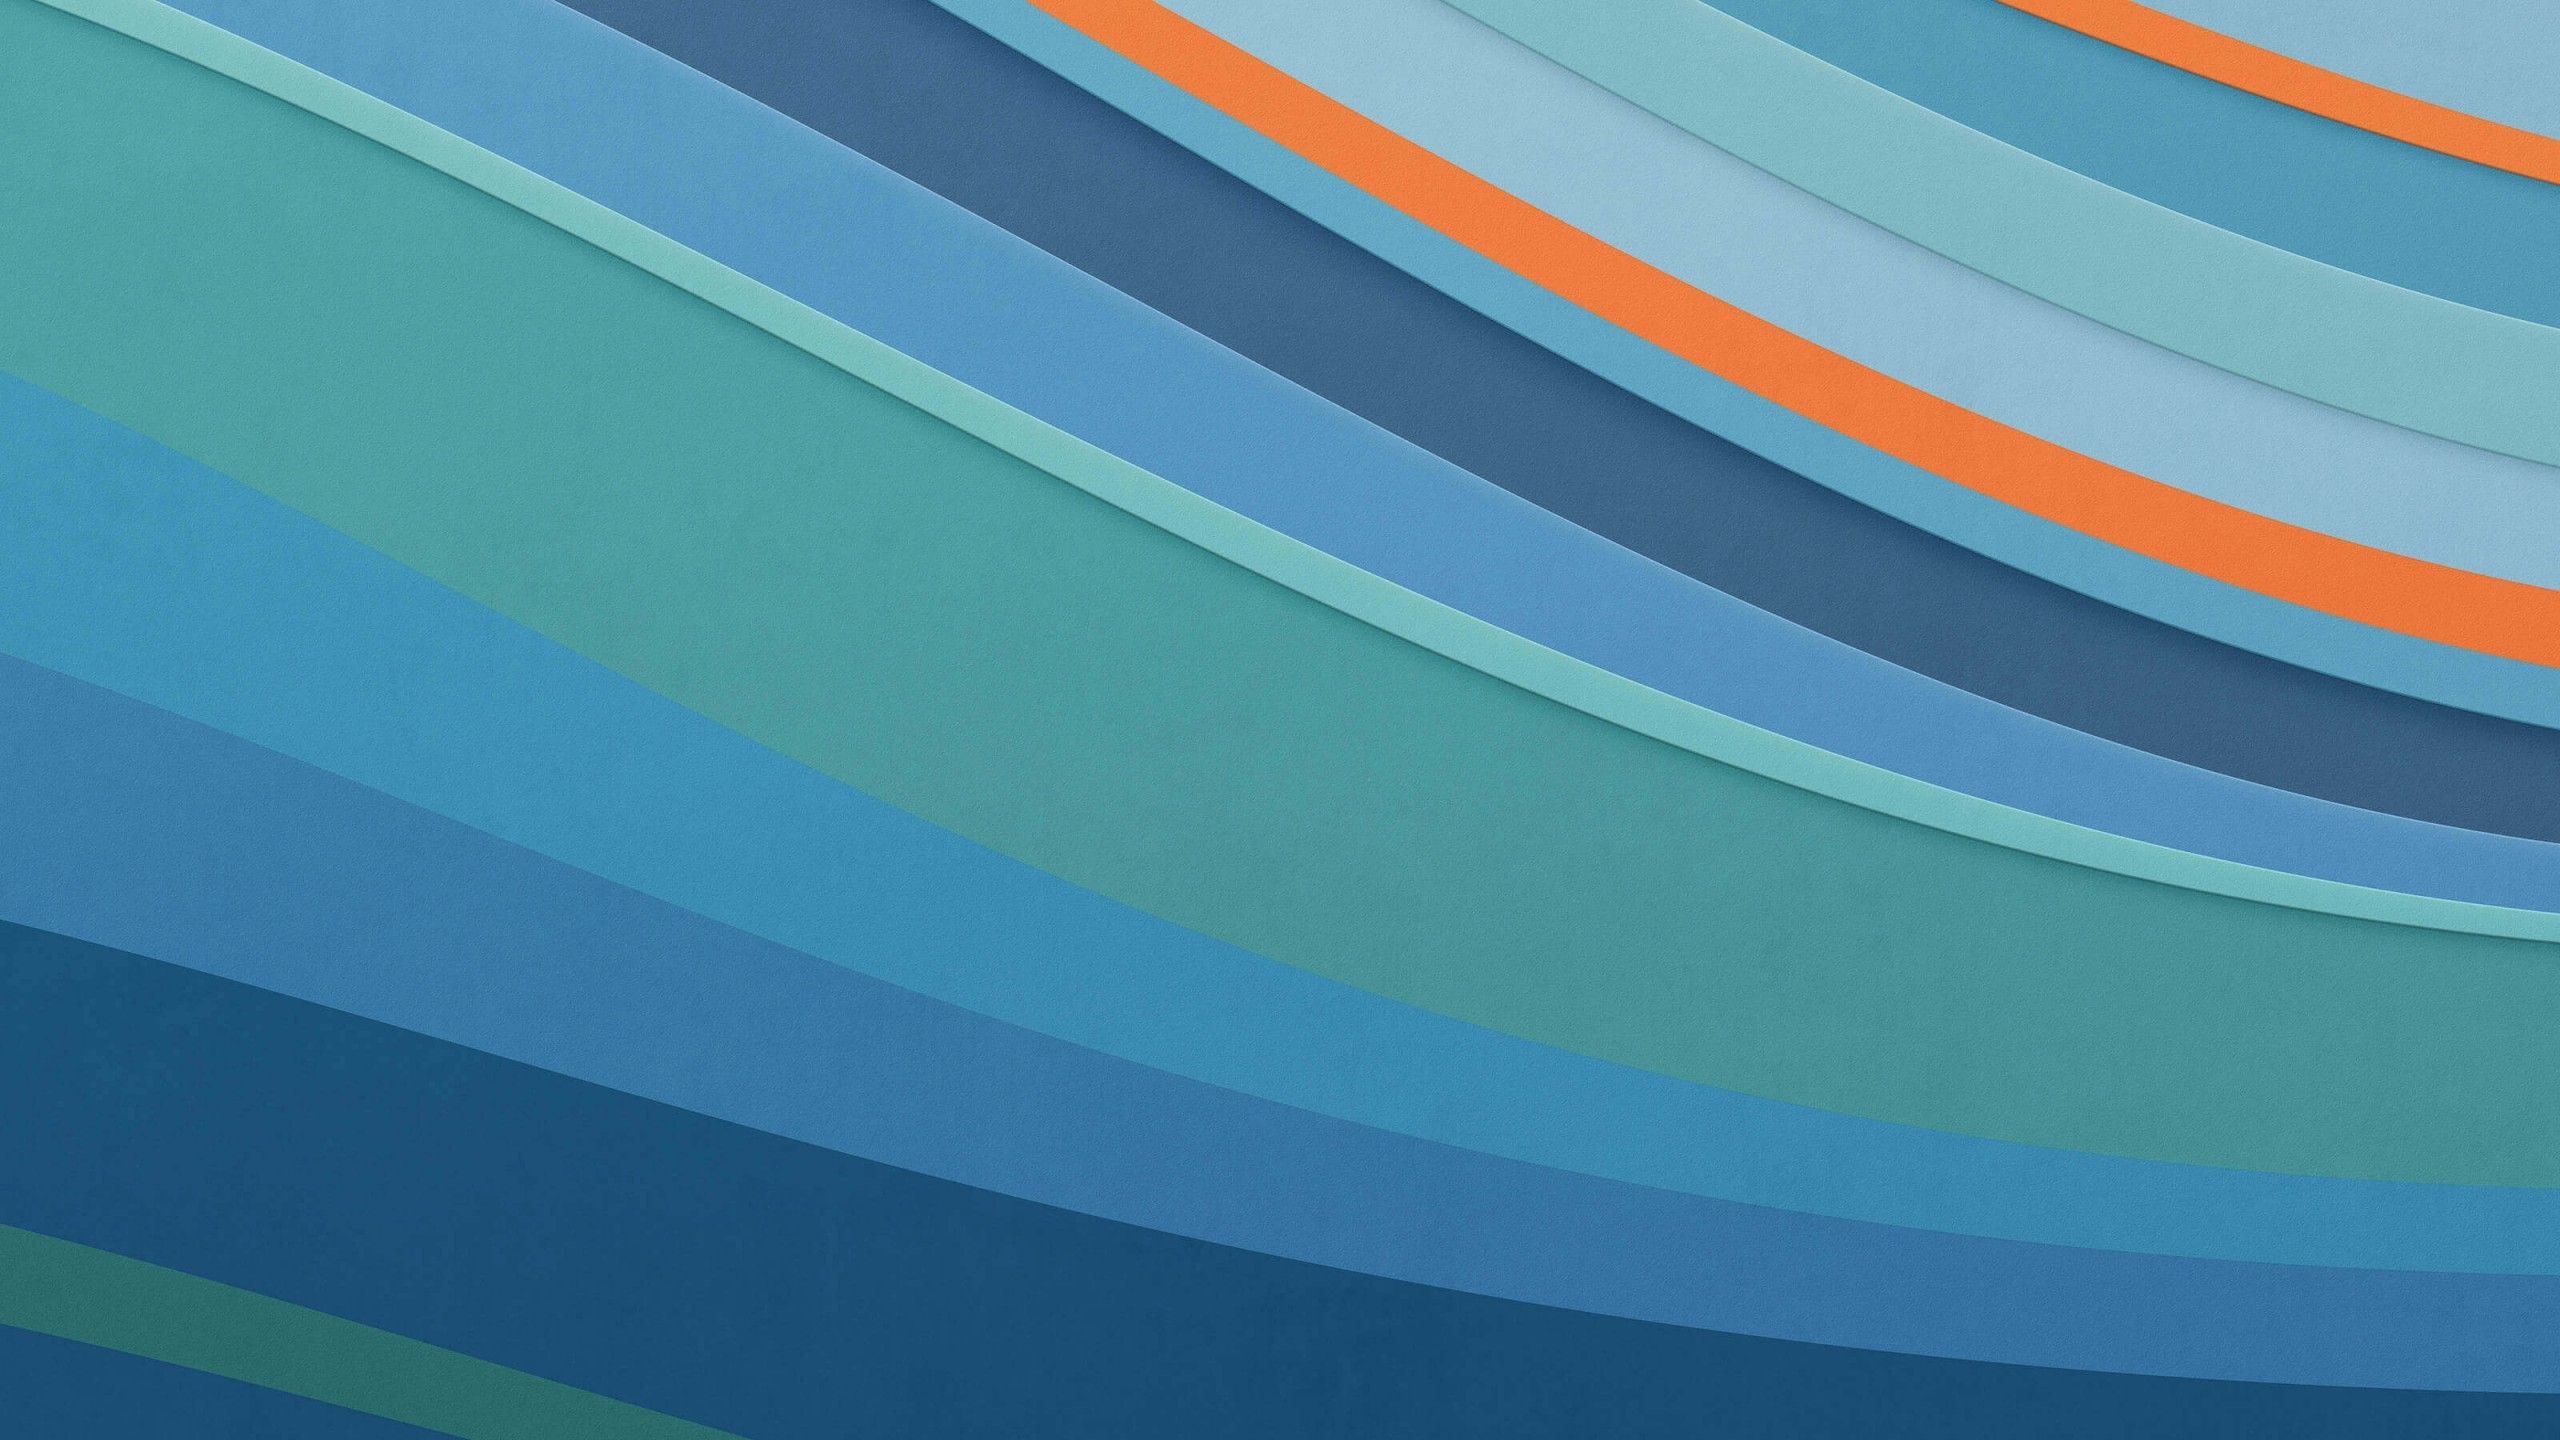 Download 2560x1440 Wavy Lines, Blue, Colorful Wallpaper for iMac 27 inch